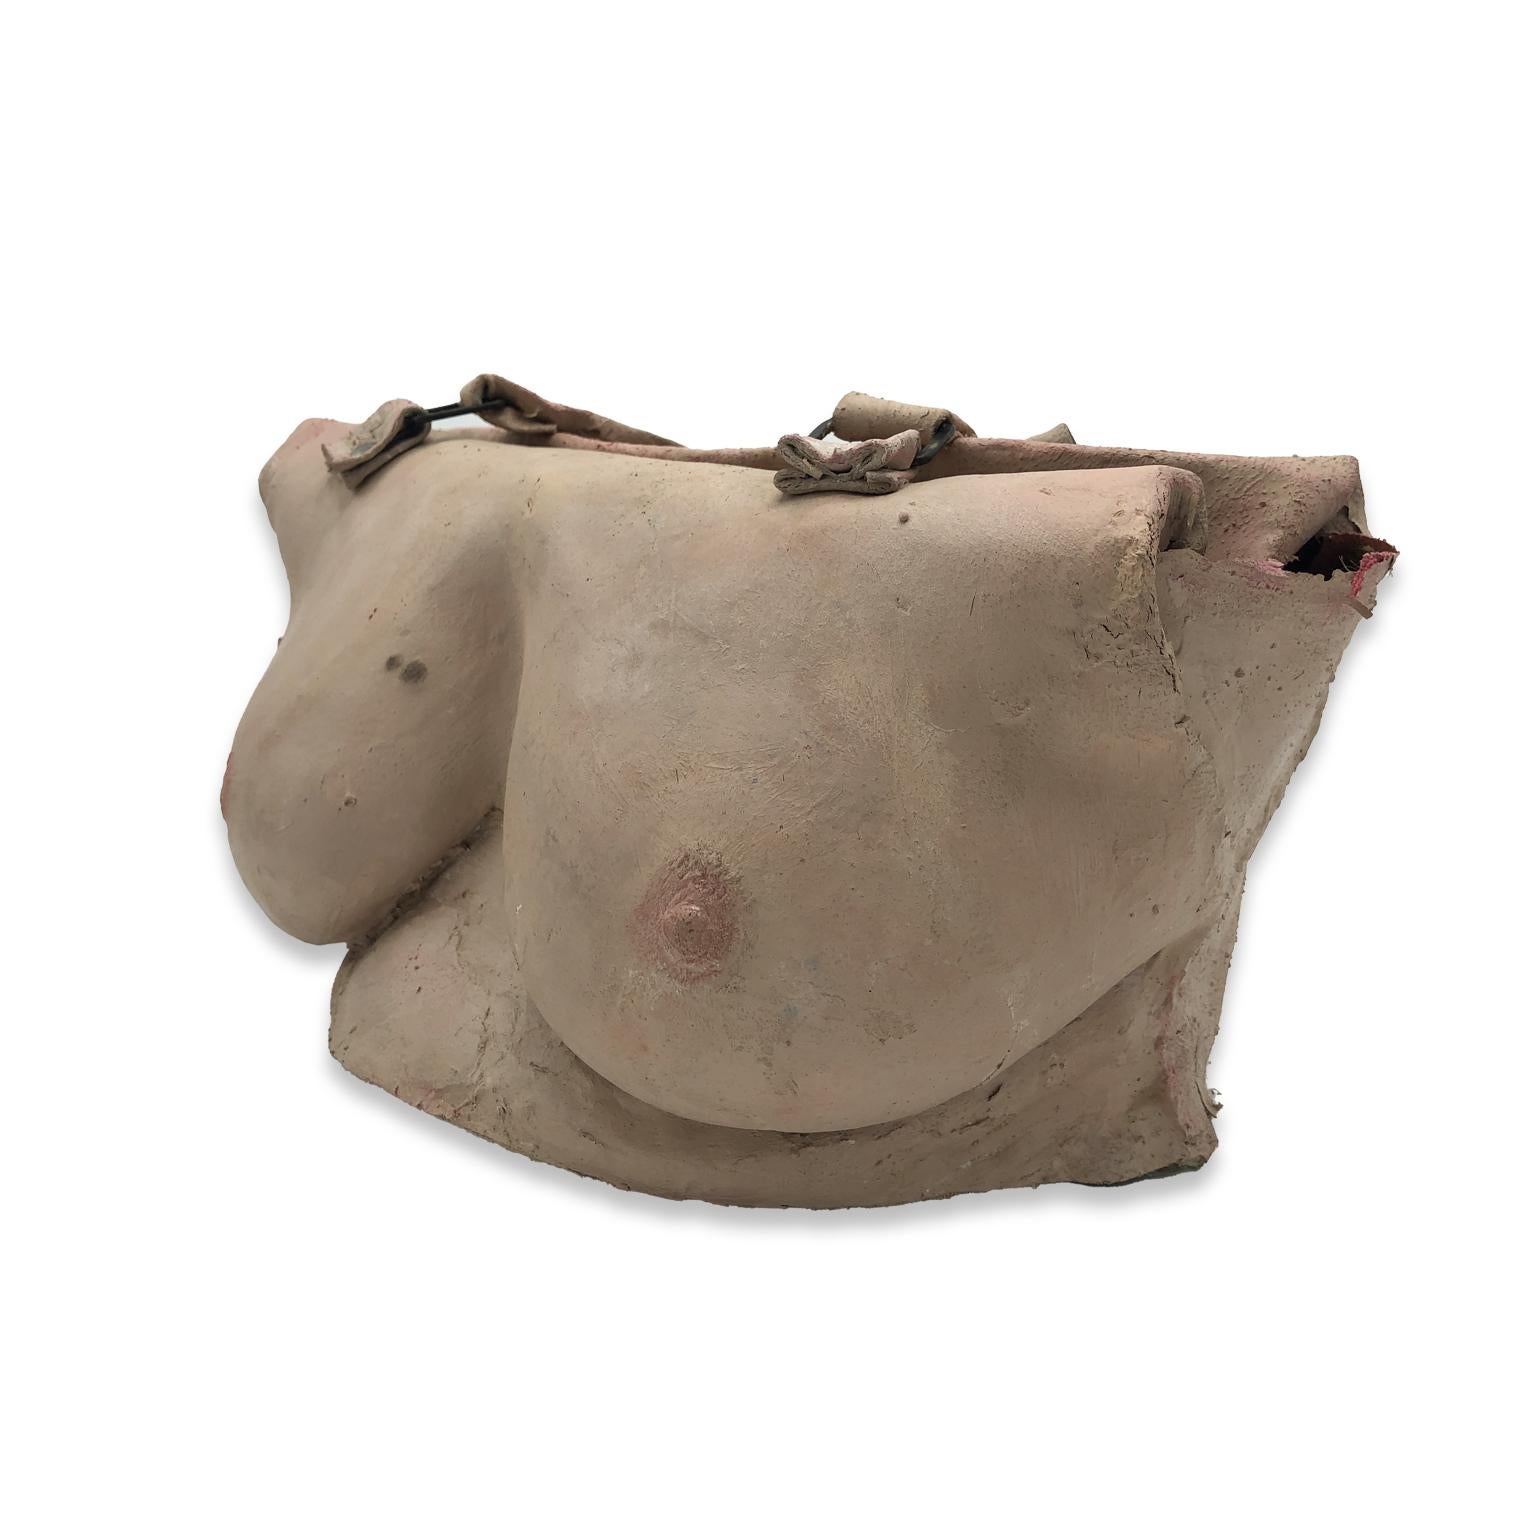 Nude Female Figurative Latex Contemporary Object - Breast Bag I - Sculpture by Miriam Meulepas